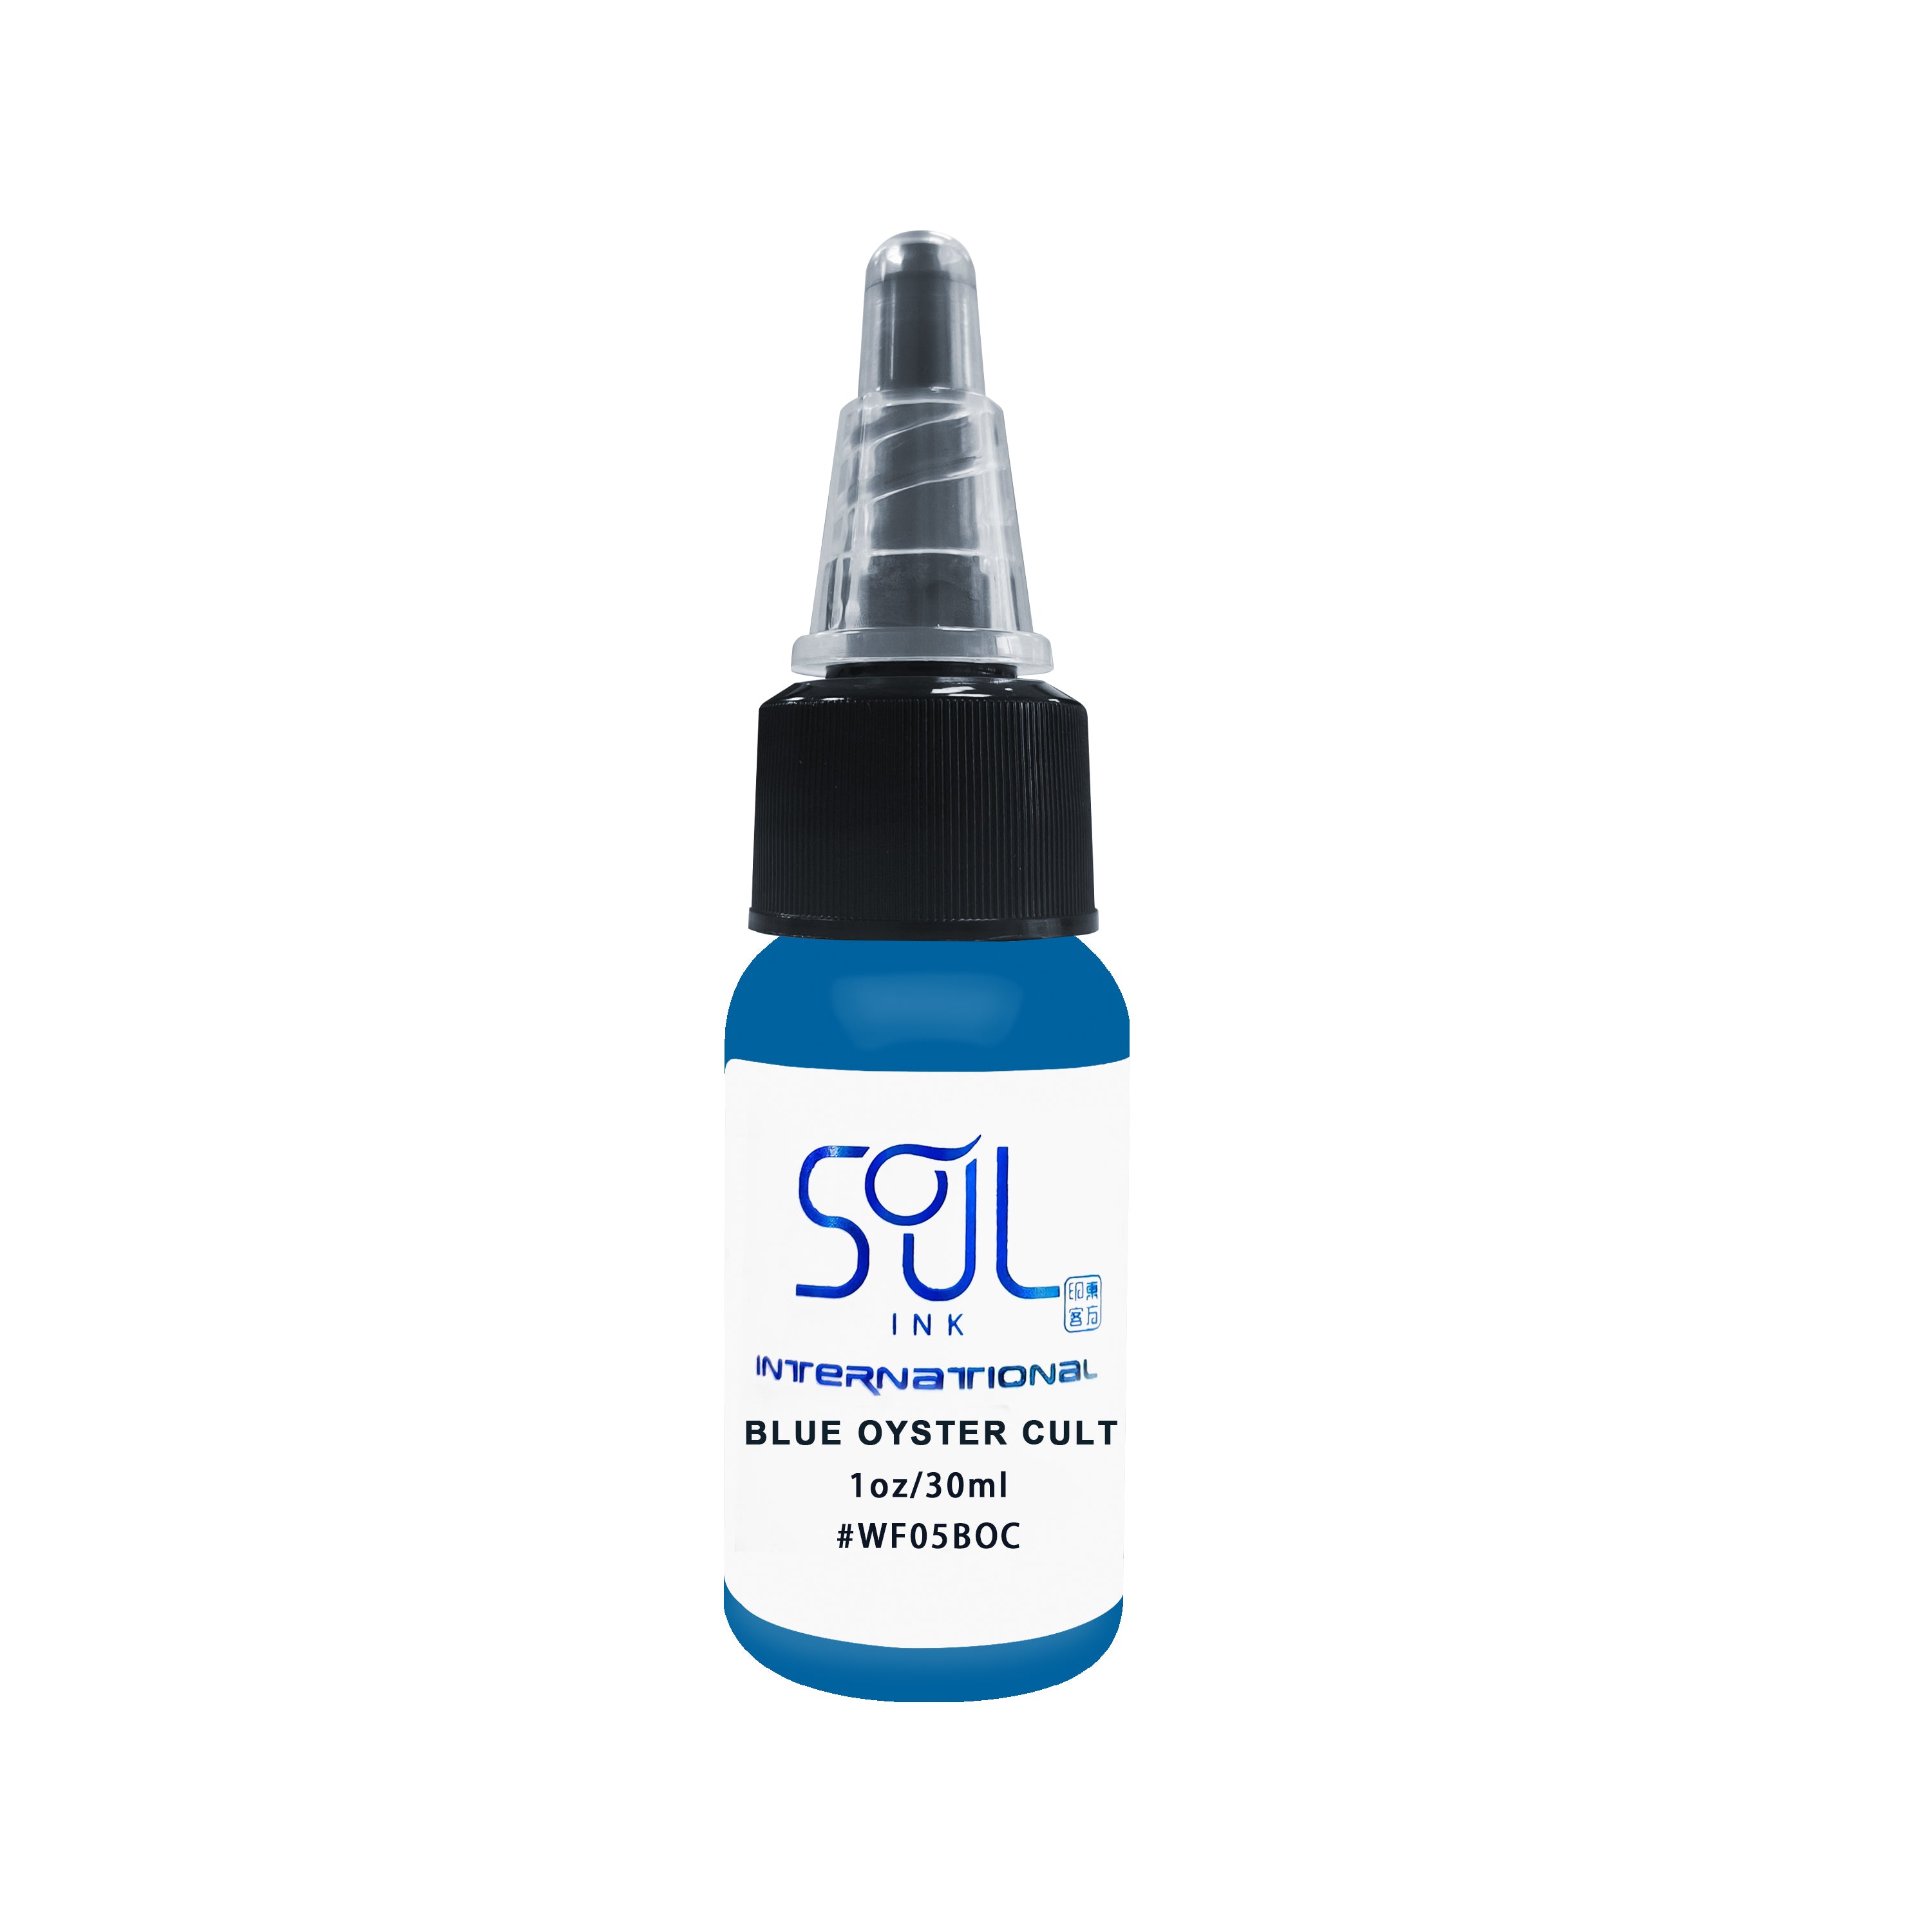 Photograph of a bottle of 'Soul Ink' brand blue oyster cult ink. The label prominently displays the brand name 'Soul Ink' in stylish blue typography against a white background. The blue oyster cult 30 ml bottle with a white label featuring the brands name 'Soul Ink'.